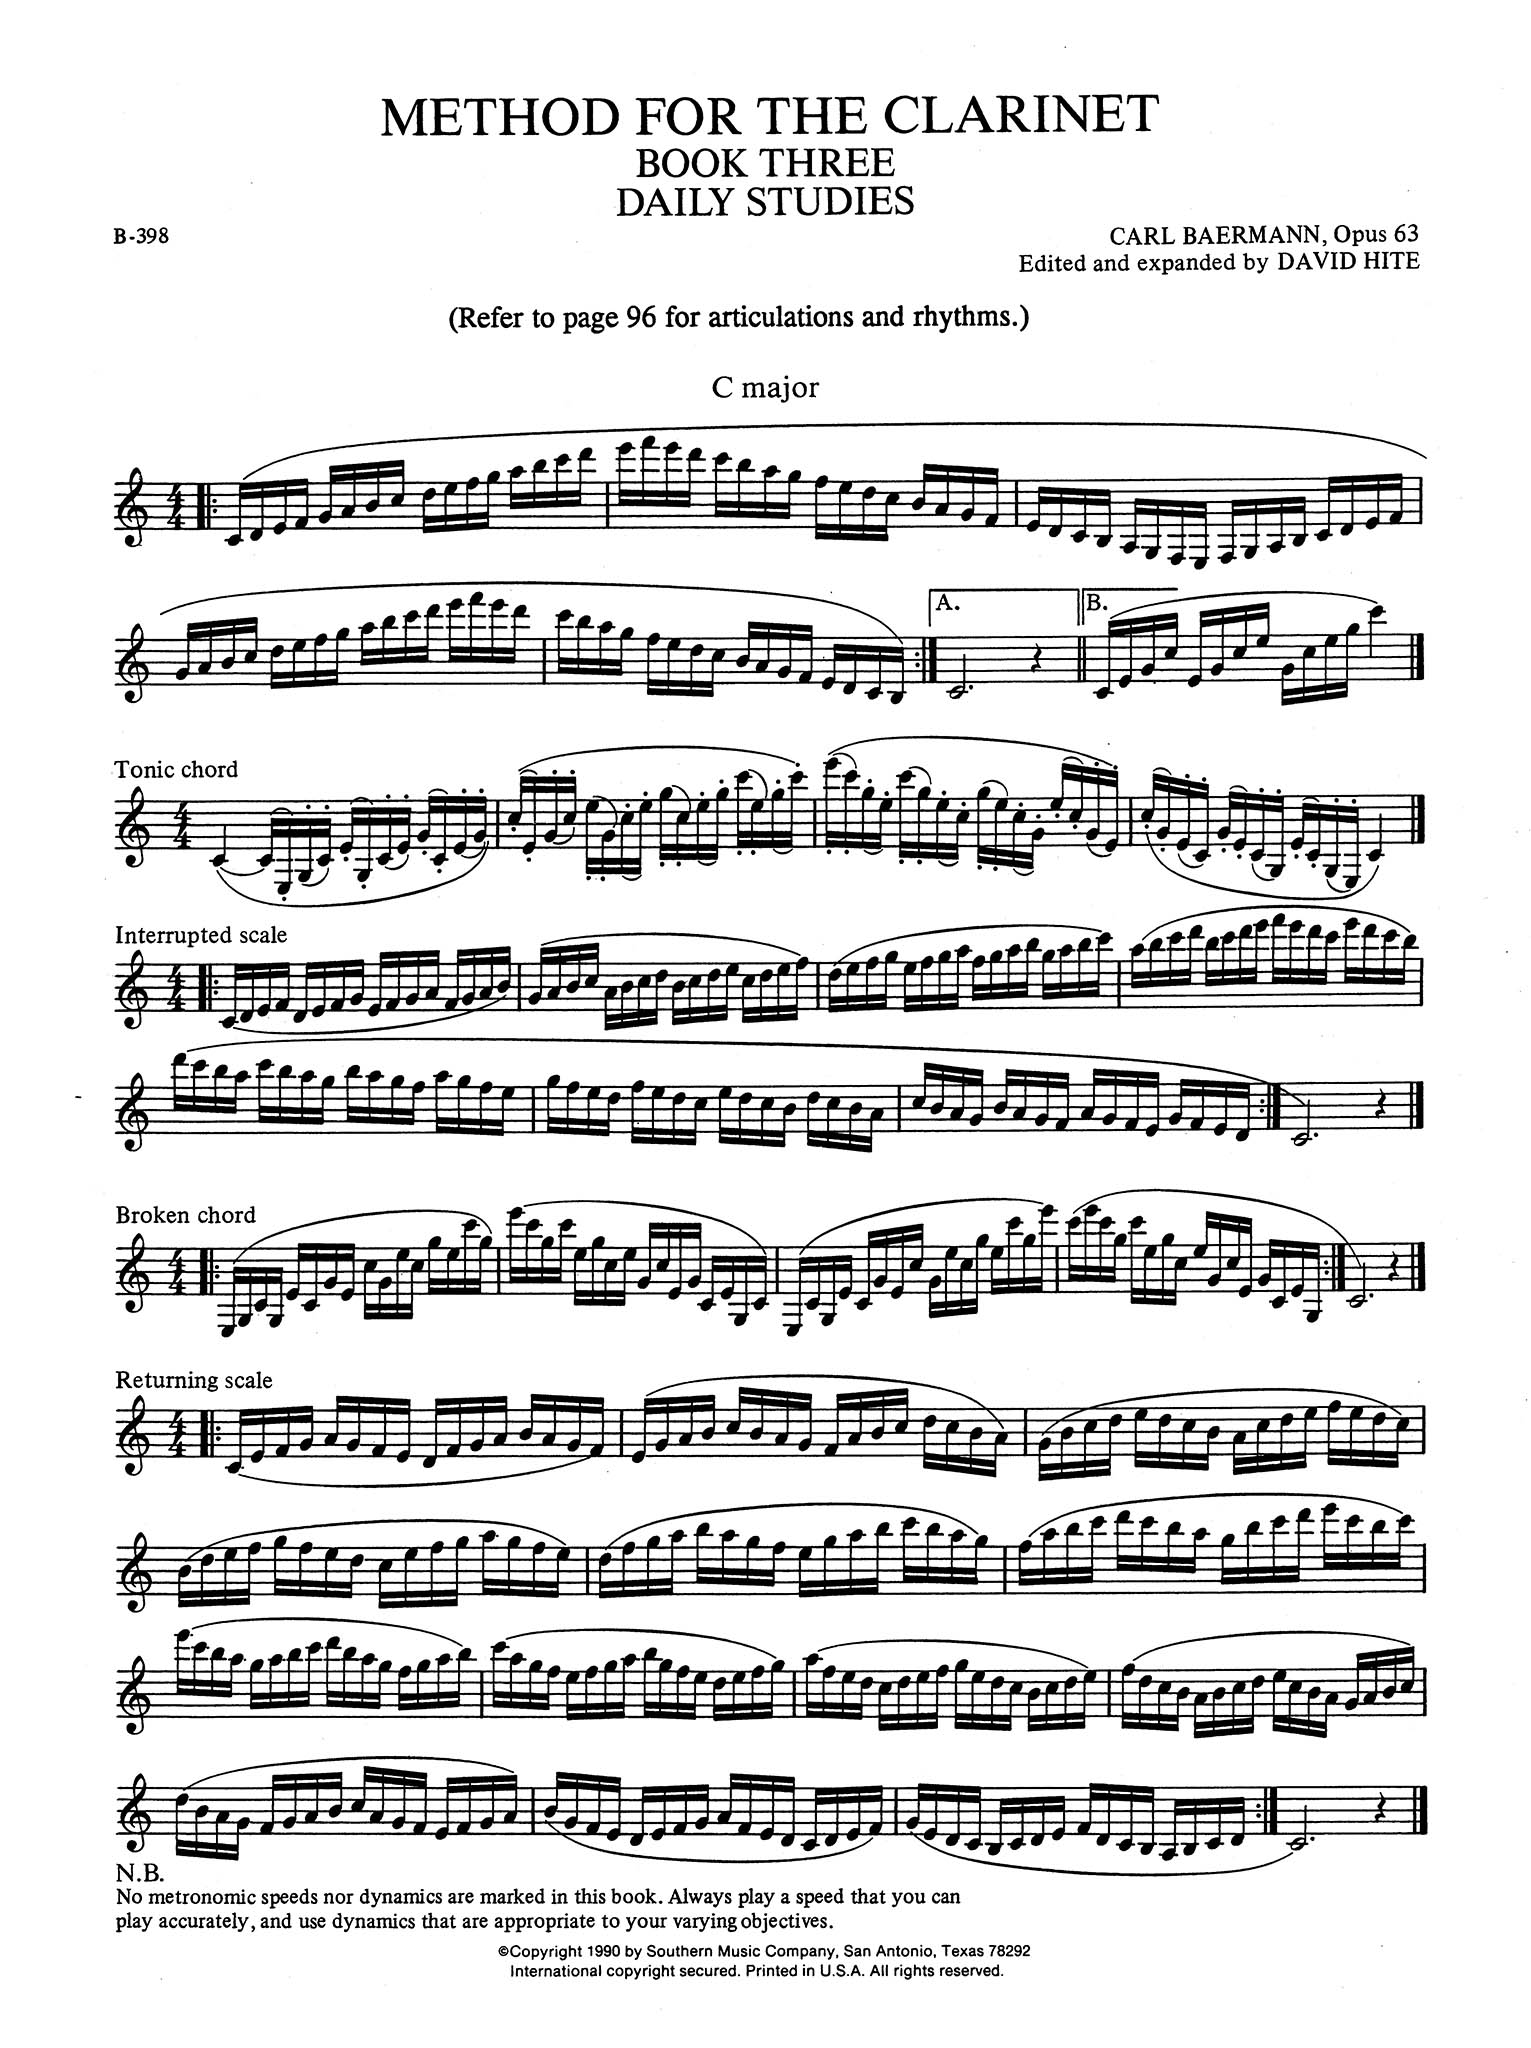 Daily Exercises from the Clarinet Method, Op. 63 Page 1